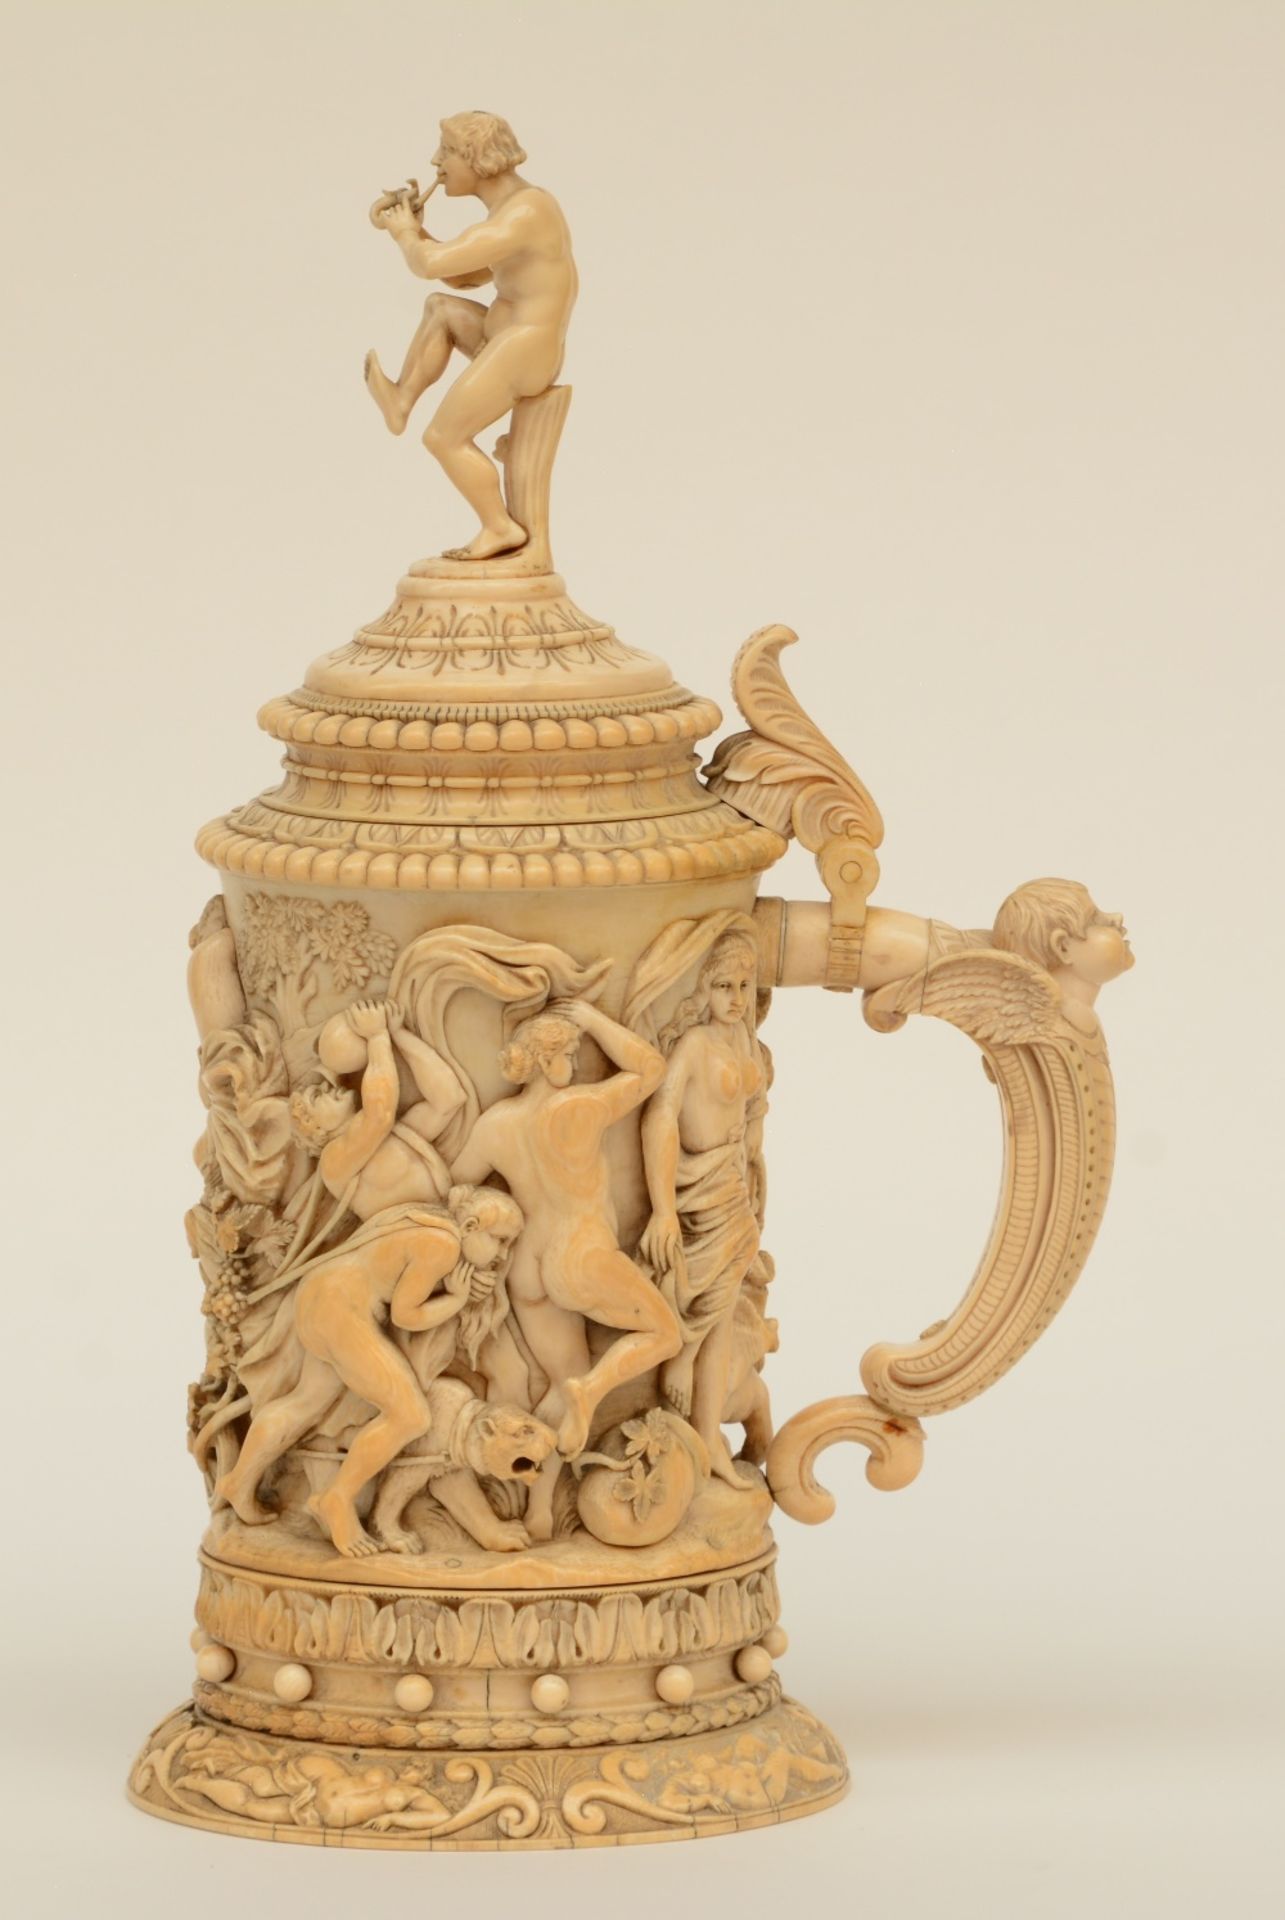 A rare German ivory Humpen, alto relievo sculpted with Bacchus on a chariot preceded by a drunken